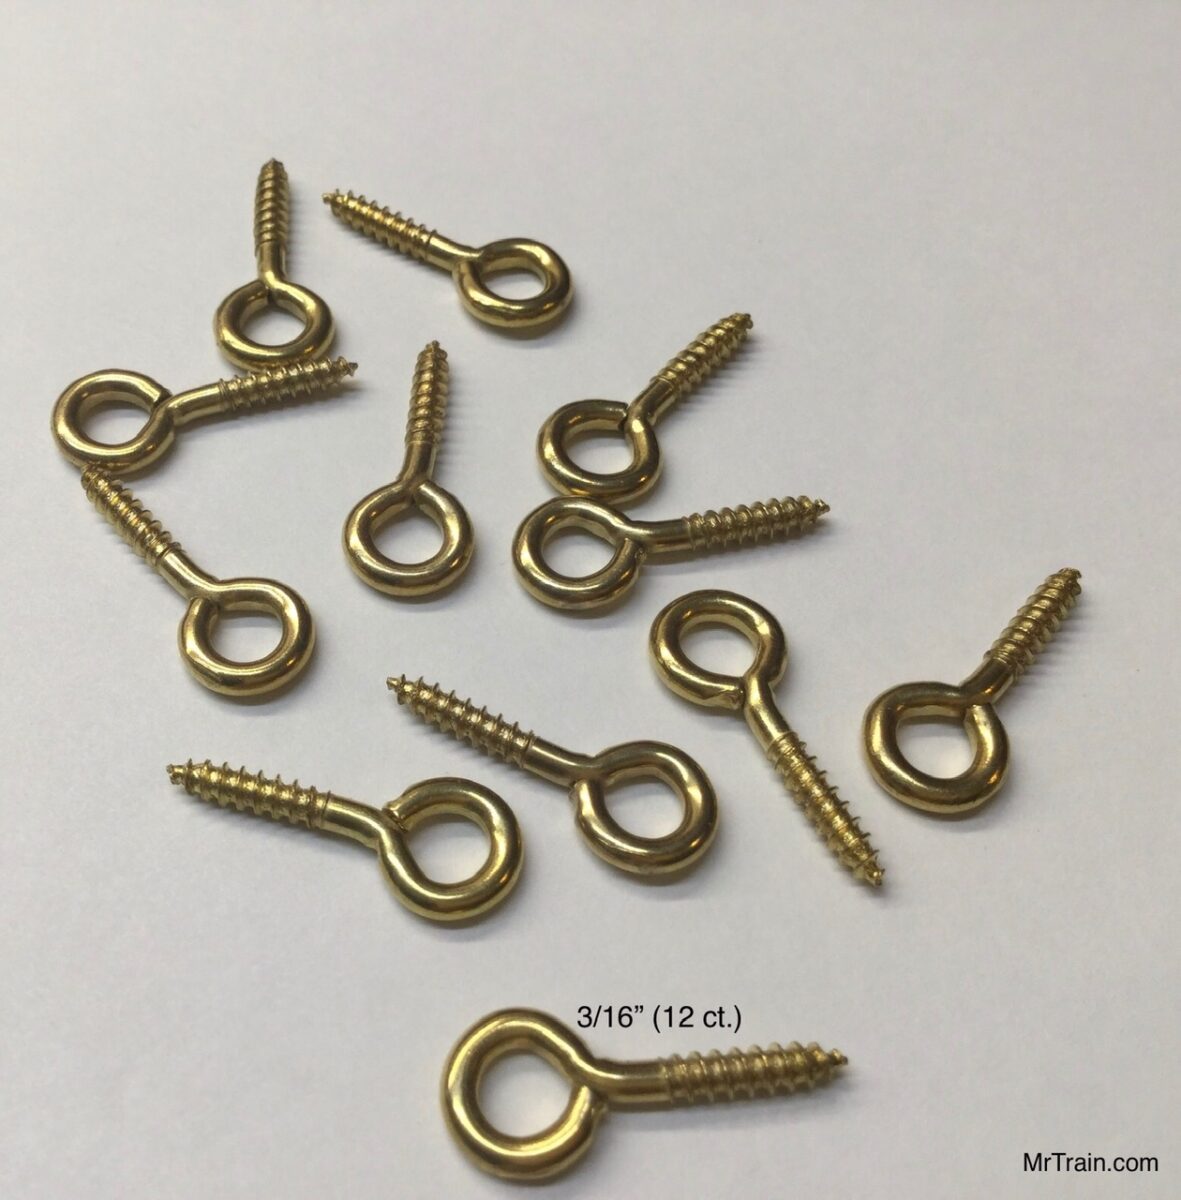 Brass Pickup Eyelets, Package of 50